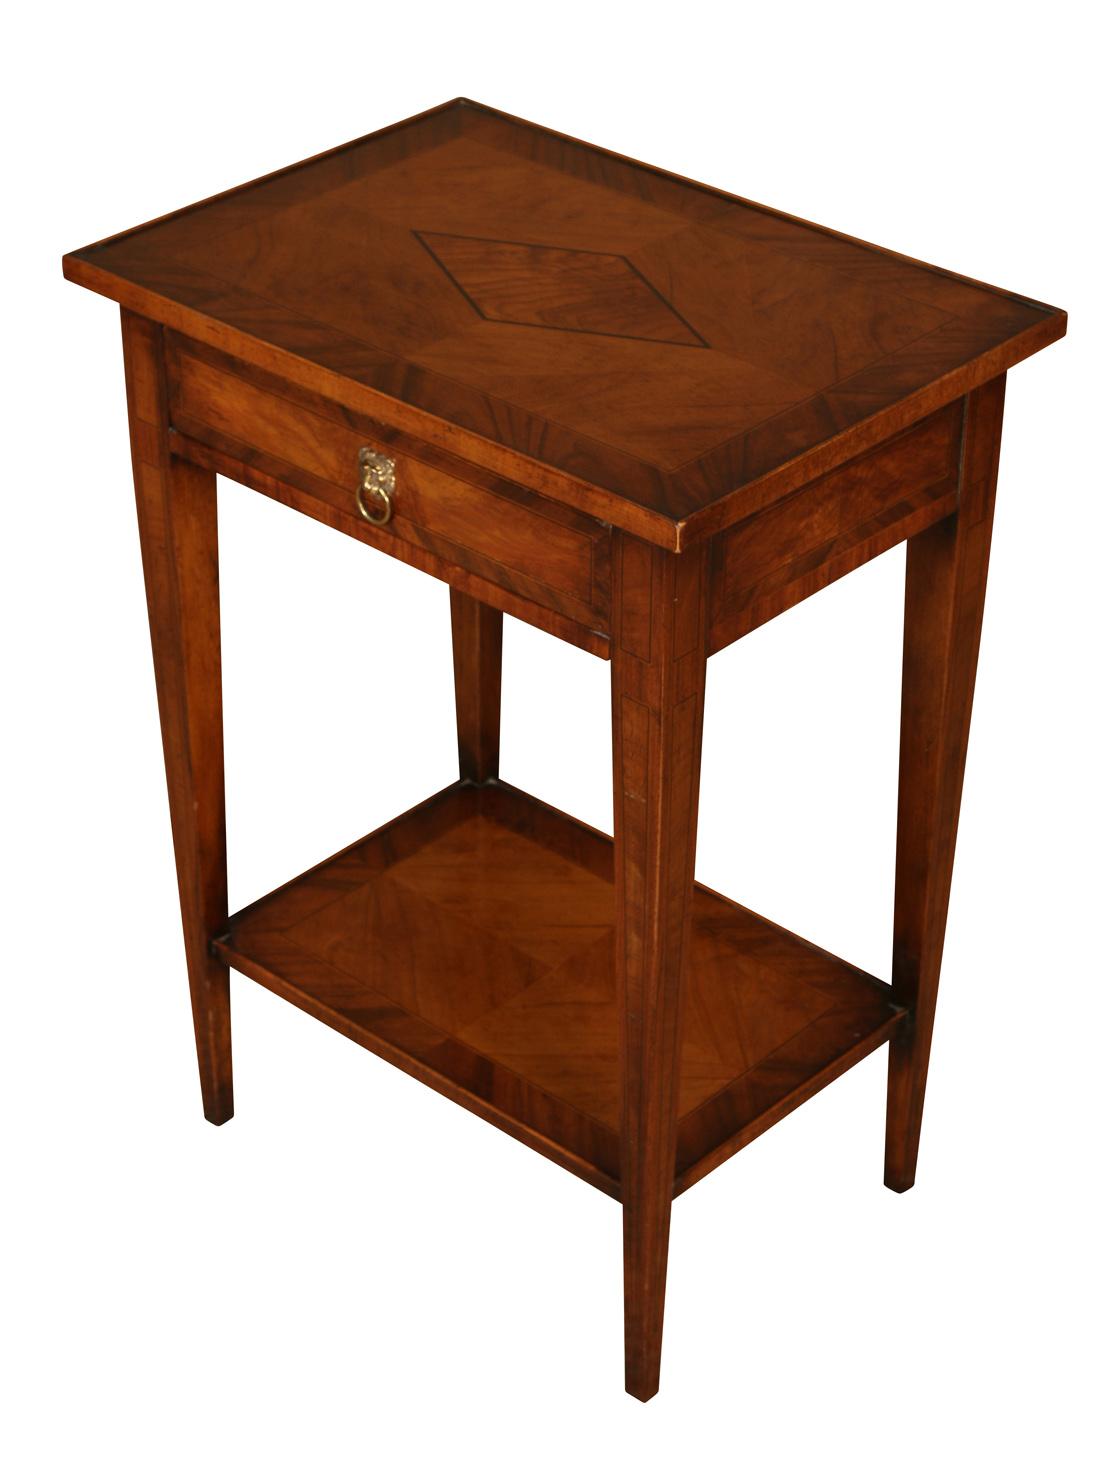 A nice looking little table in walnut with lovely cross banding detailing and an inlaid design on top. This useful little table features a single drawer with a lion's head ring pull and a lower shelf.